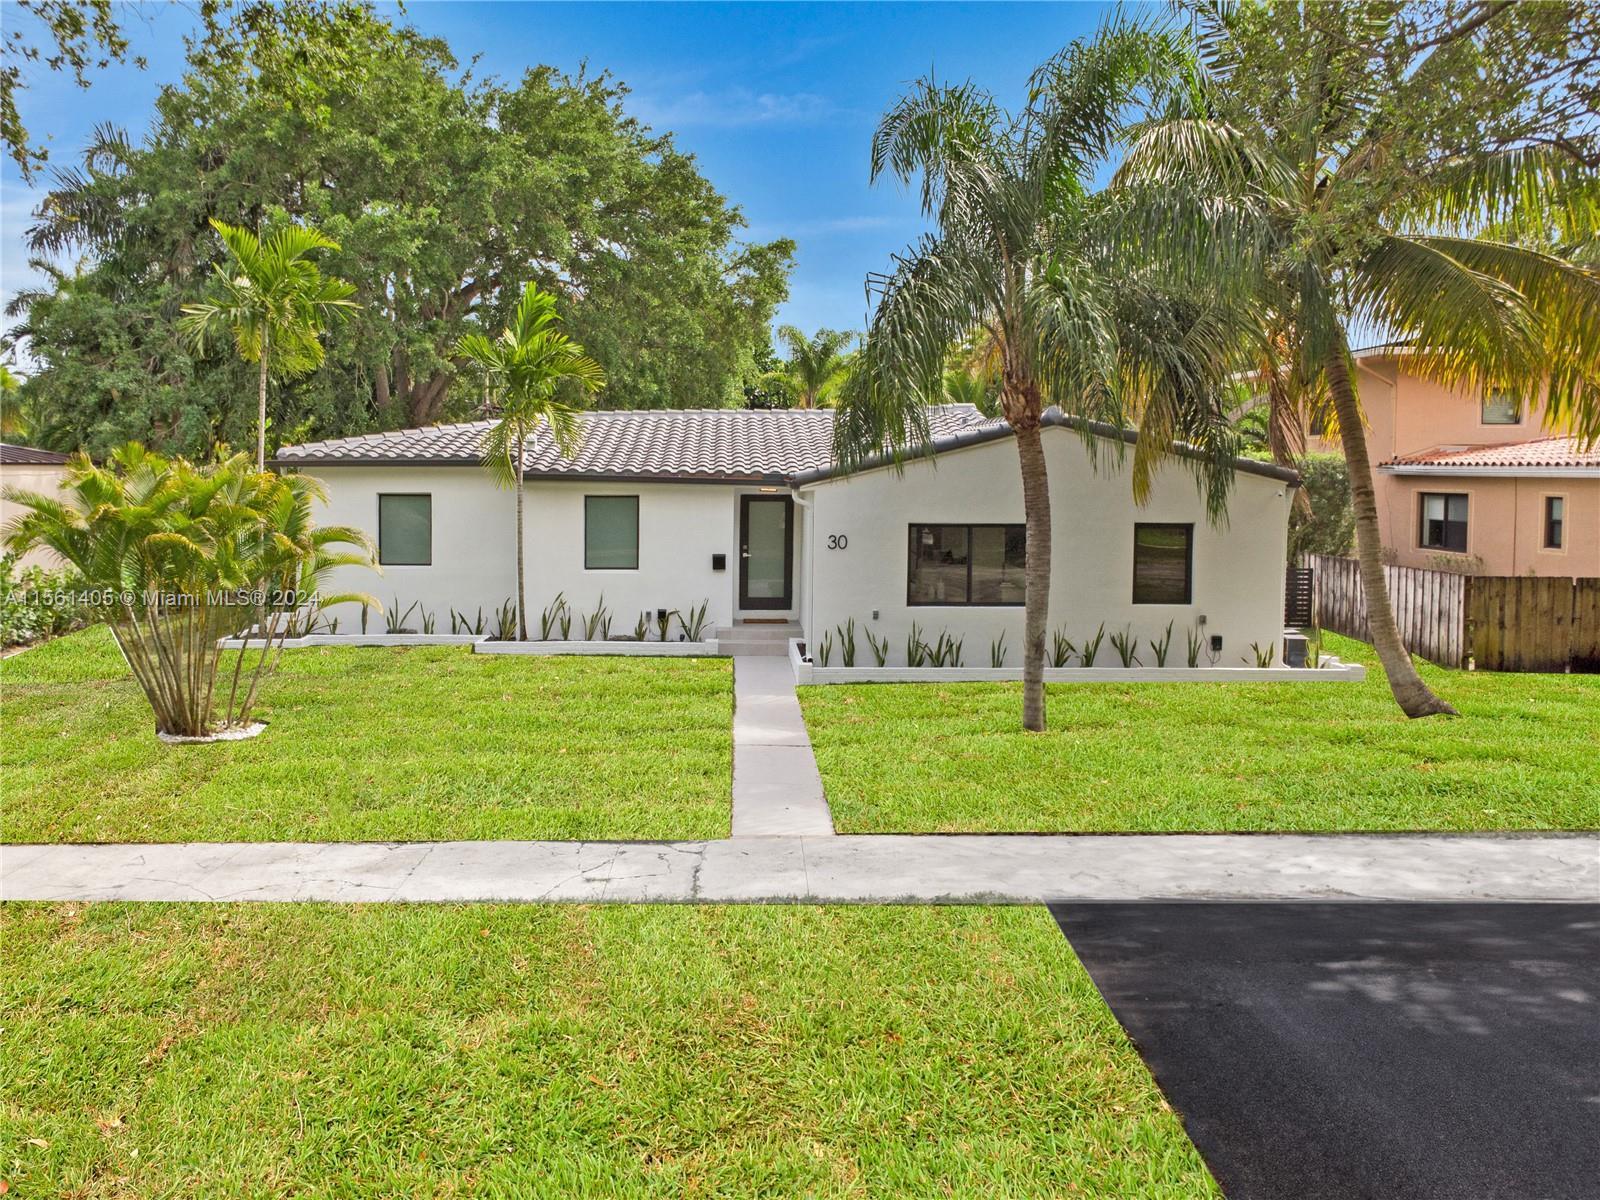 Photo of 30 NW 107th St in Miami Shores, FL